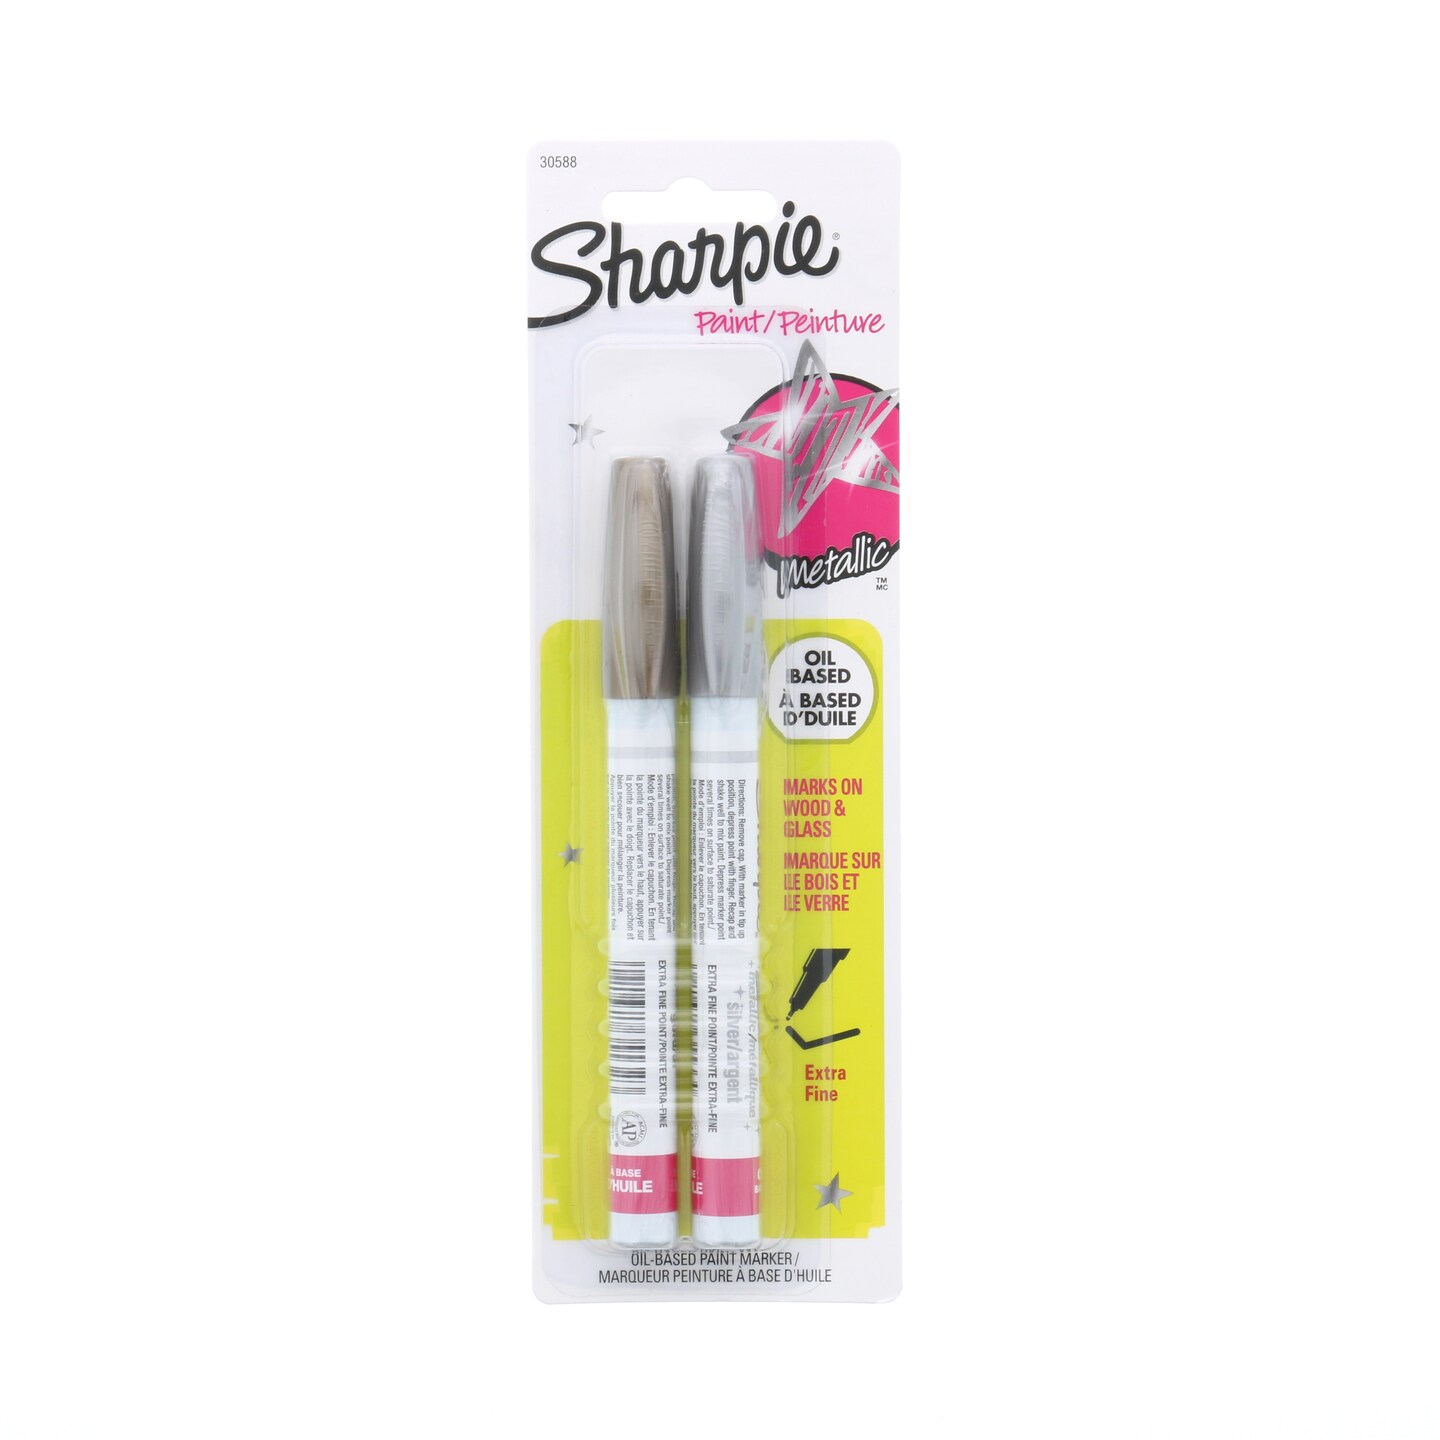 Sharpie Oil-Based Paint Marker - Gold and Silver, Extra Fine Point, Set of  2